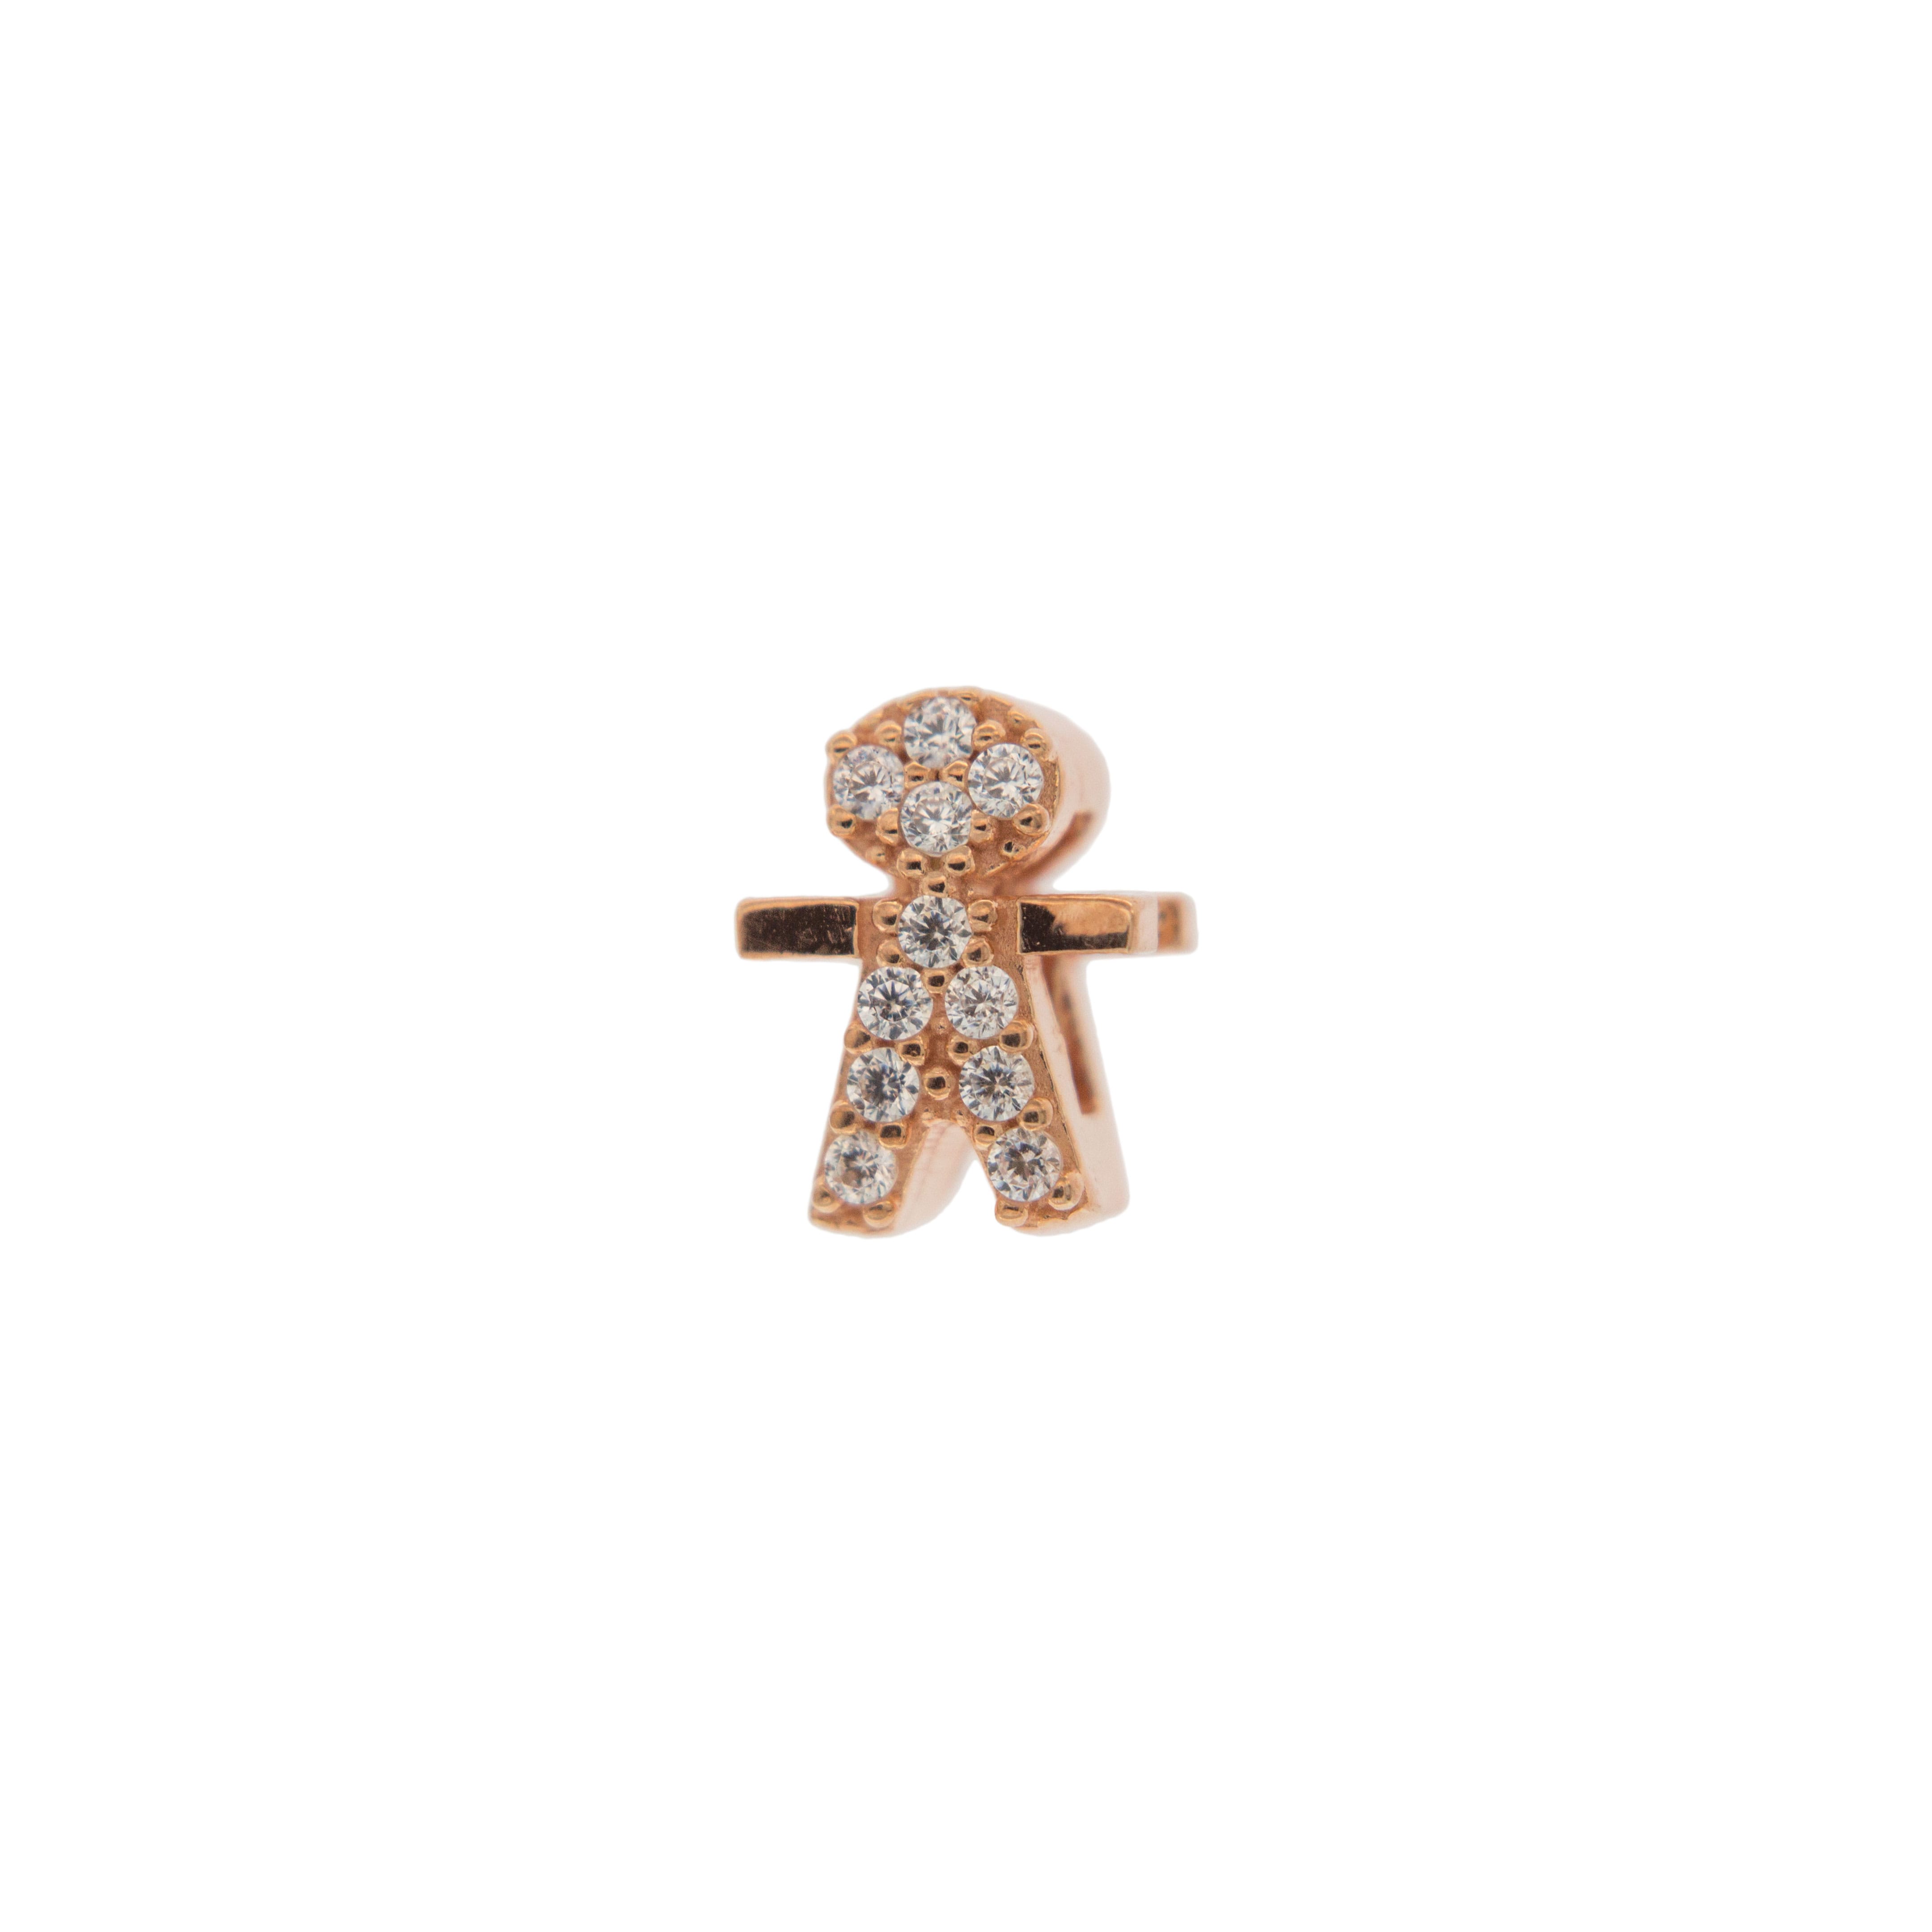 Moments - Moment Little Boy with Zircon for Carousel Bracelet and Choker - 1 | Rue des Mille